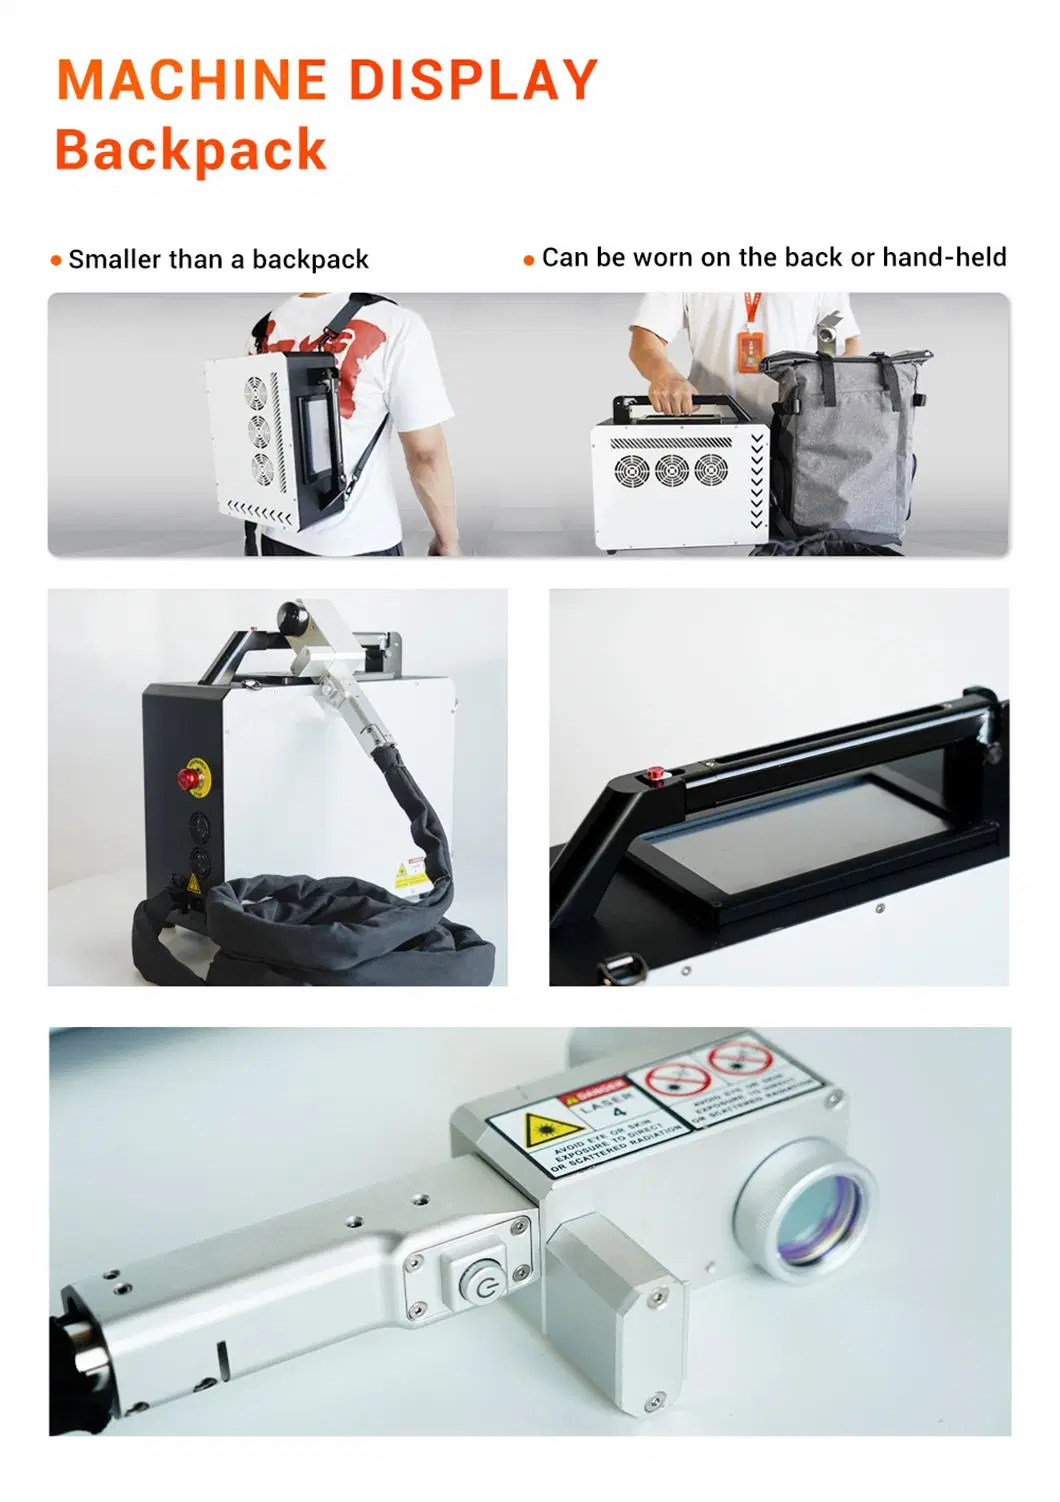 Rust Paint Powder-Coating Removal 50W Fiber Laser Cleaner Backpack Laser Cleaning Equipment 100W